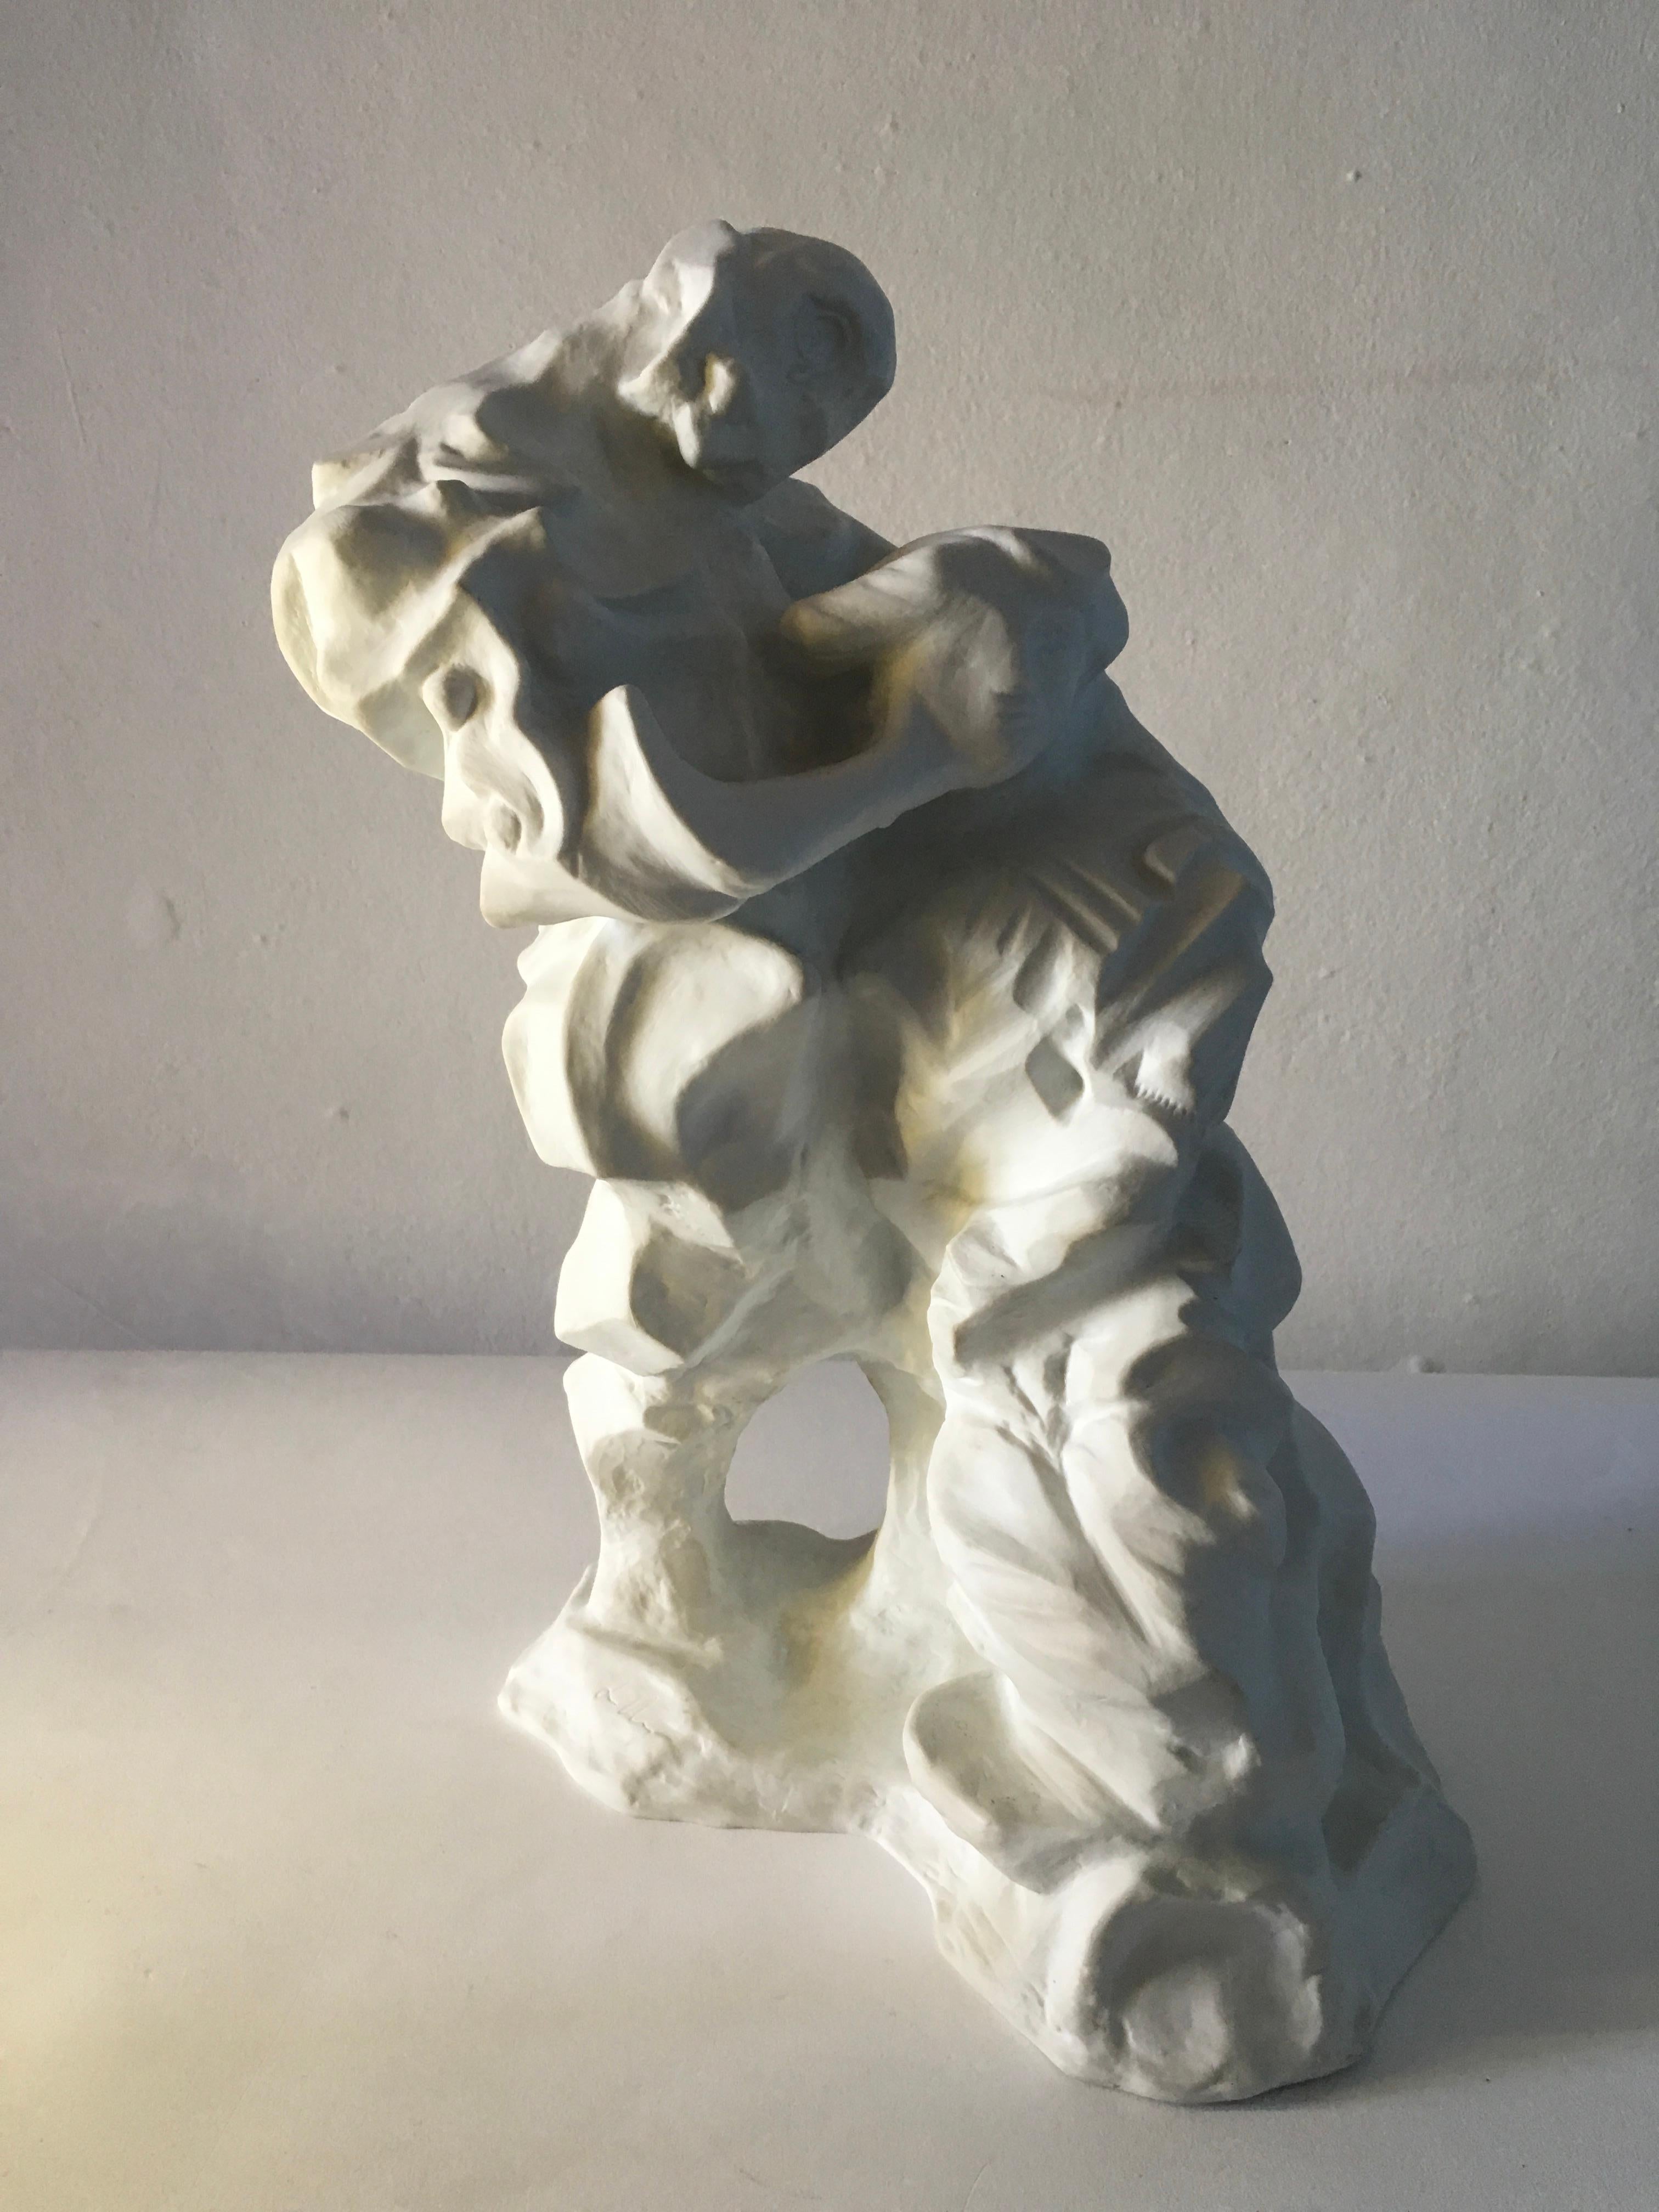 Pygmalion Porcelain Sculpture by Sandro Chia Rosenthal 1989 Studio Line In Excellent Condition For Sale In Milan, Italy